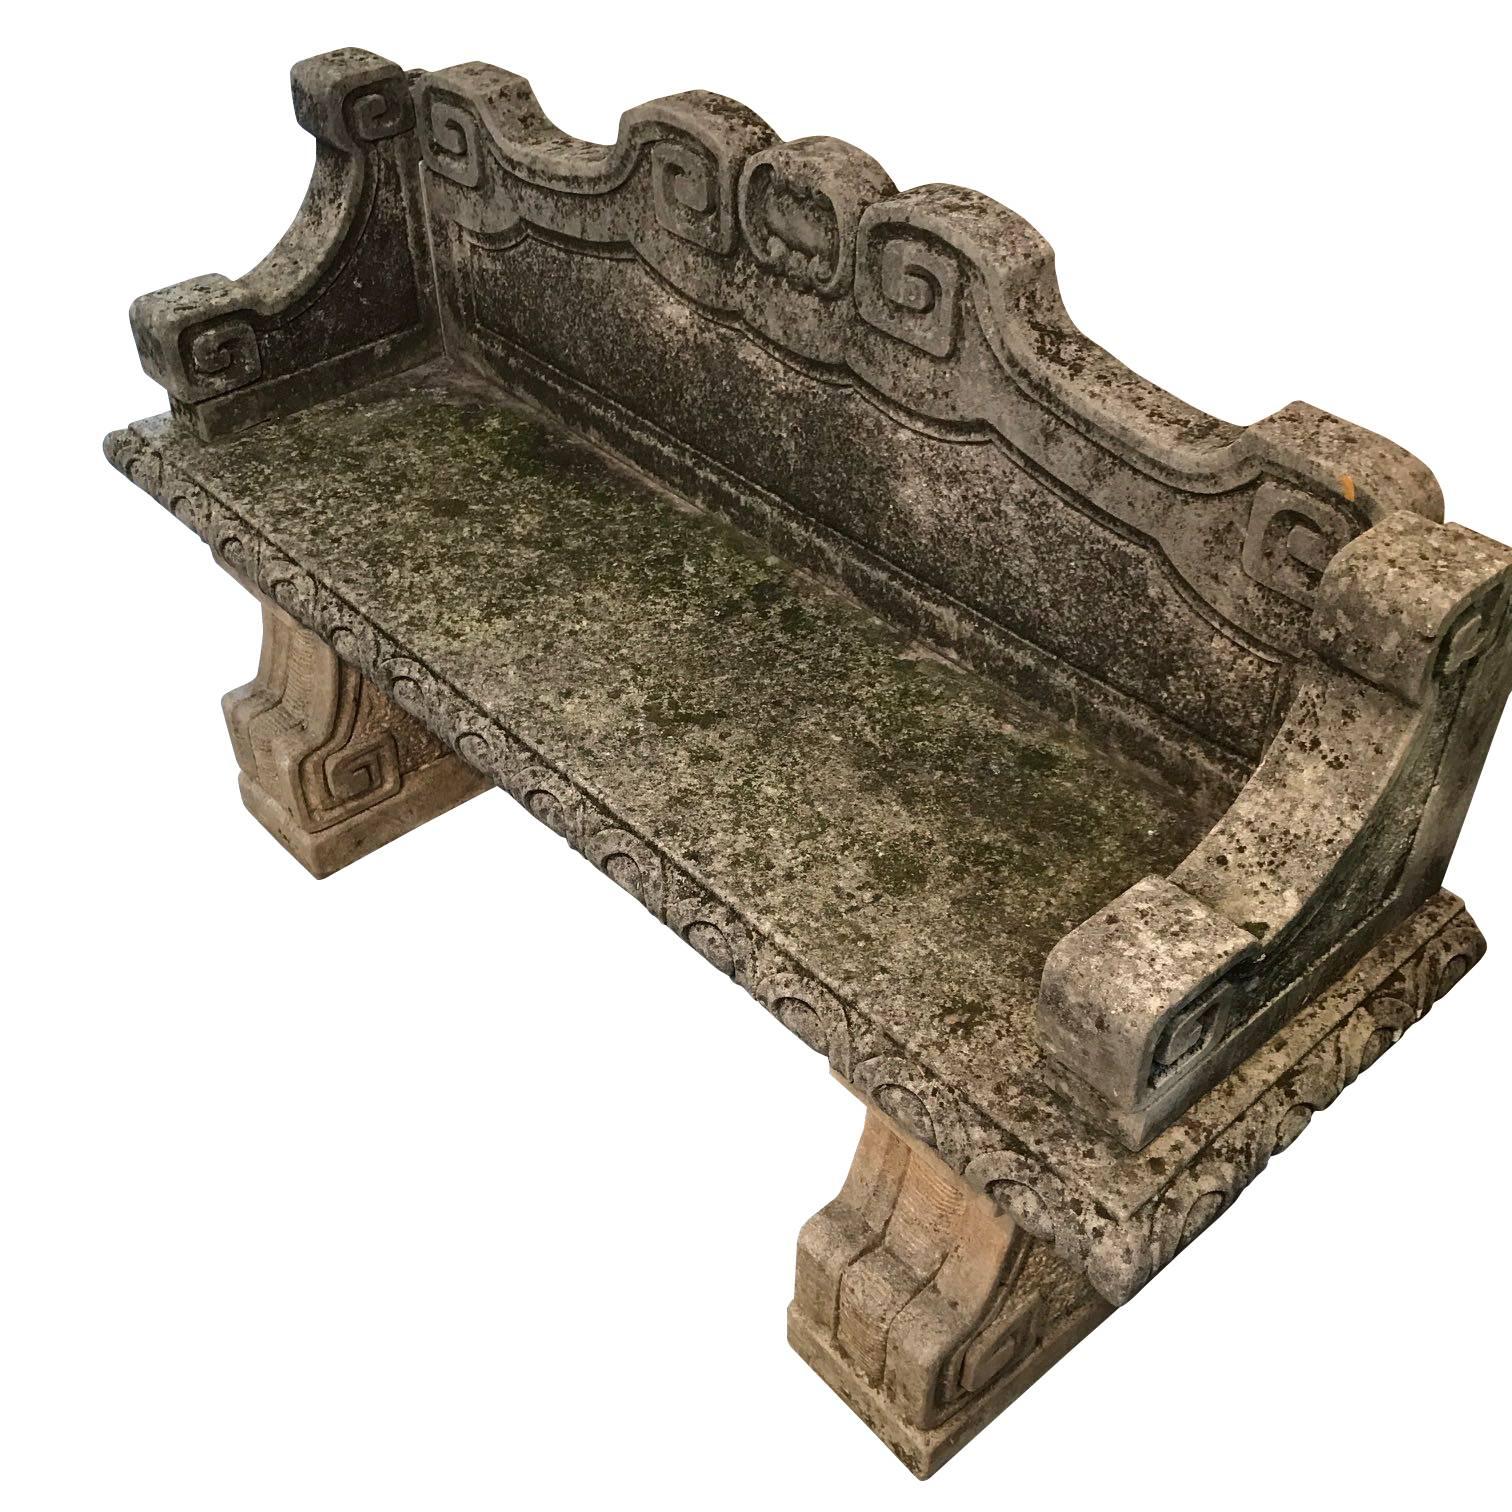 1920s Italian hand carved Vicenza stone bench with Classic design details.
Traditional decorative details along back and sides.
Moss and spores embedded in stone give naturally aged patina.
Originally from large garden in a villa outside of